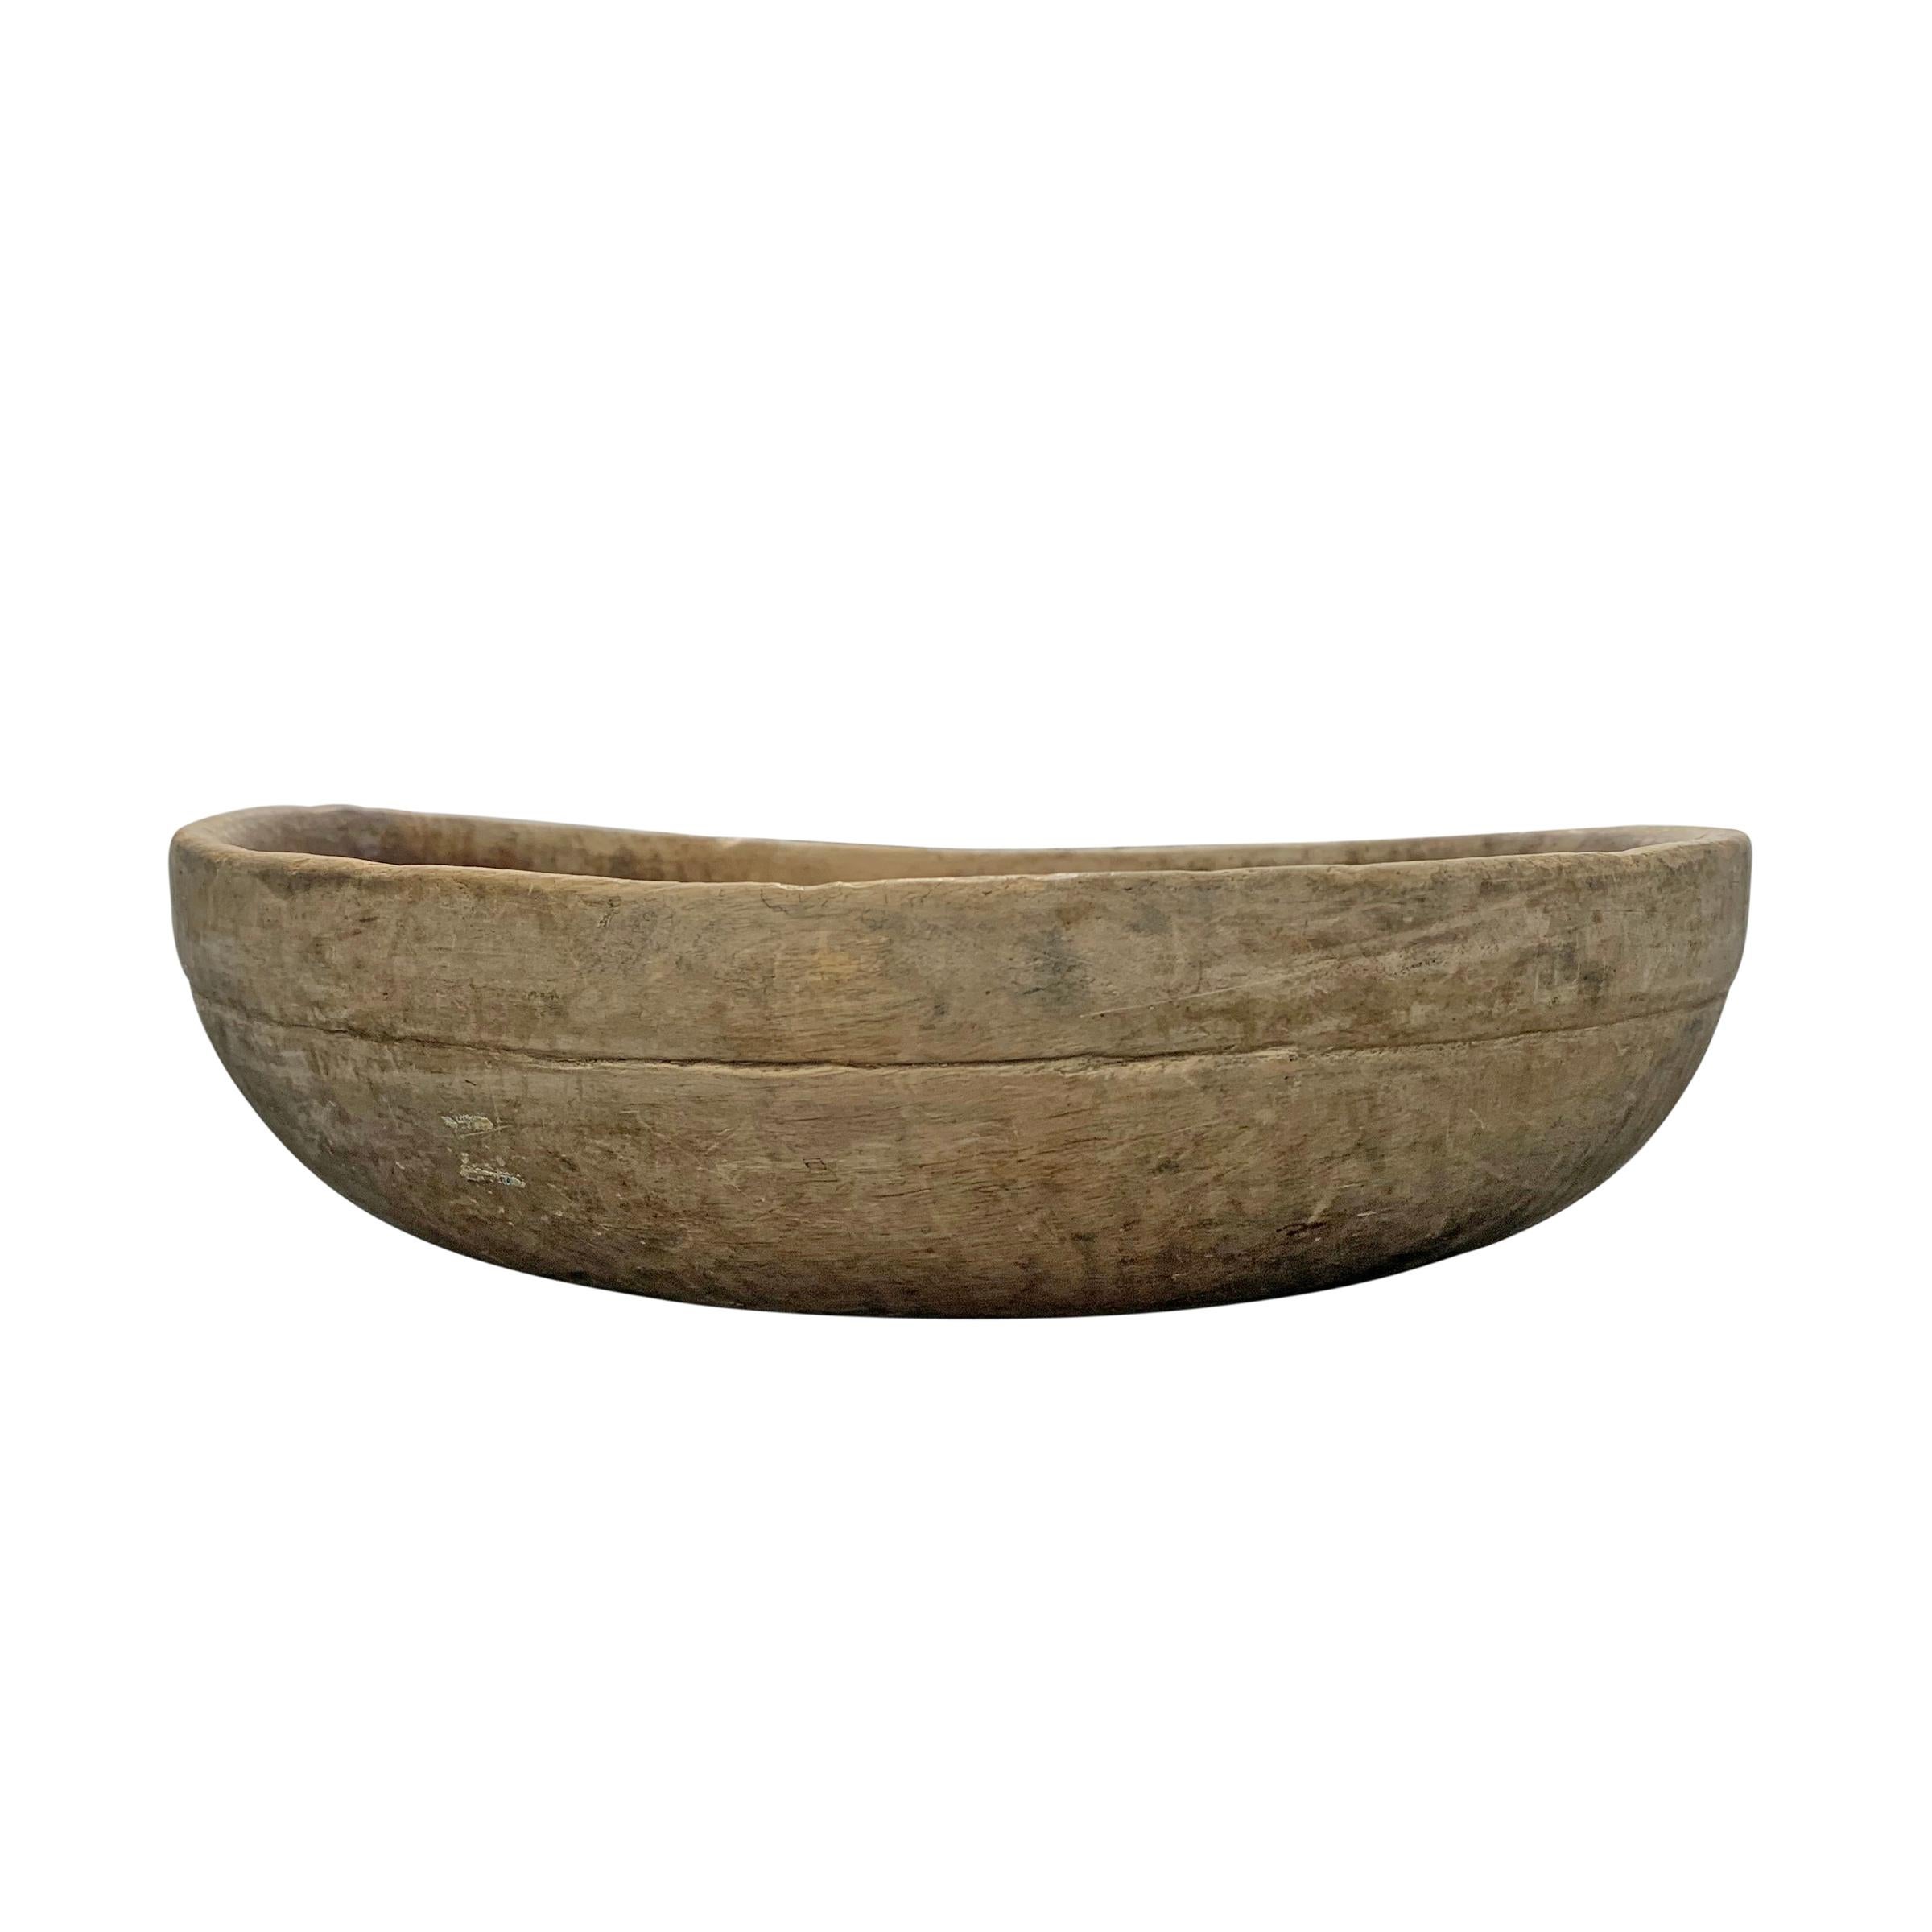 A fantastic 18th century Swedish turned wood dairy bowl with an amazing dark patinated interior and a soft greyed exterior with an incised line around the rim. An old crack serves to remind us of its storied past.